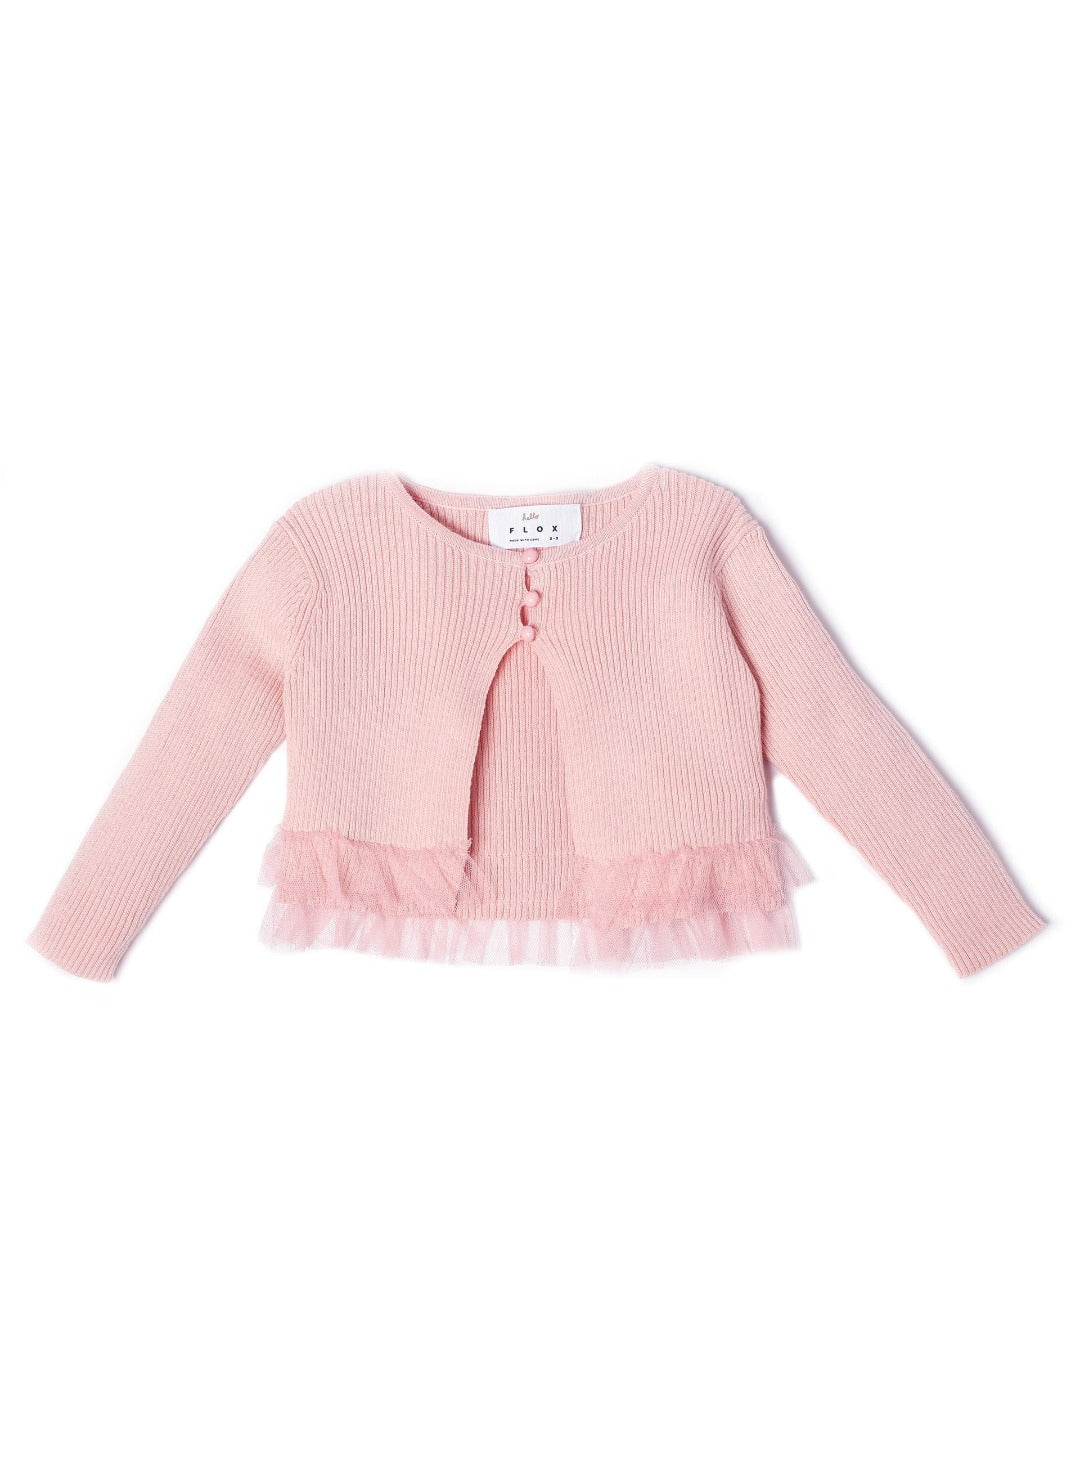 pink cropped cardigan with cute ruffles